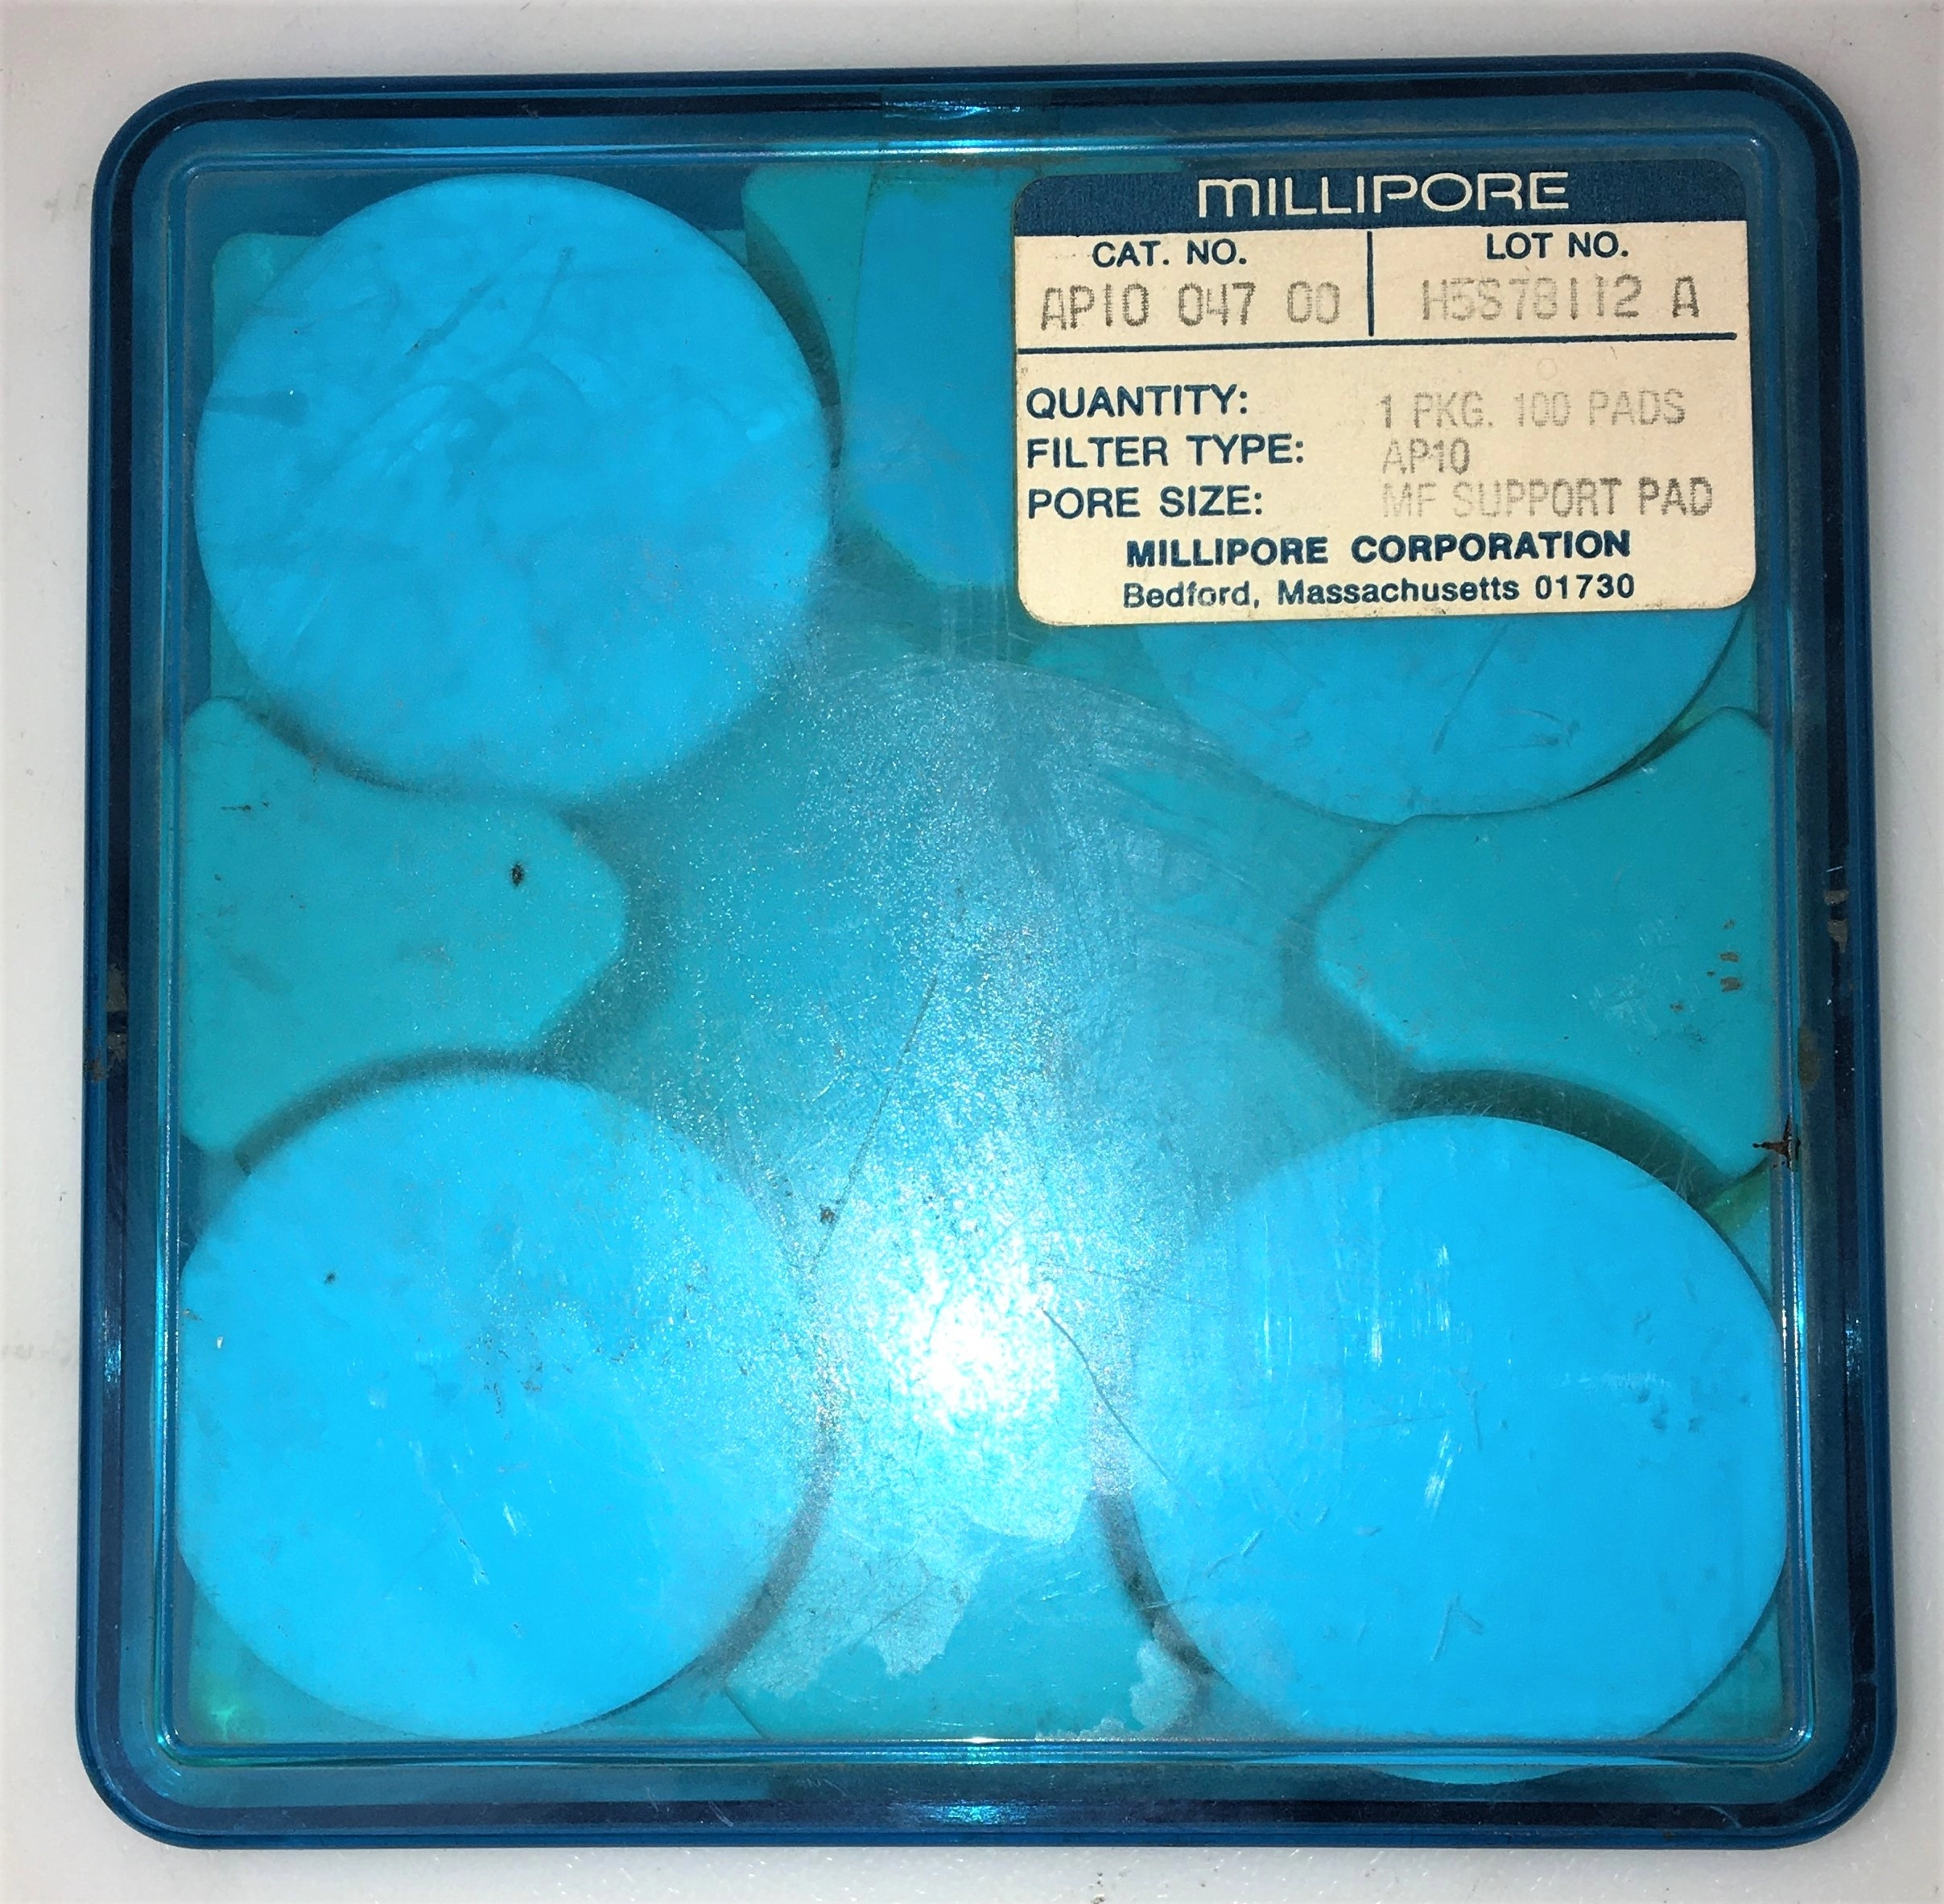 Millipore AP10-04700 Cellulose Support Pads - 47mm (Pack of 100)